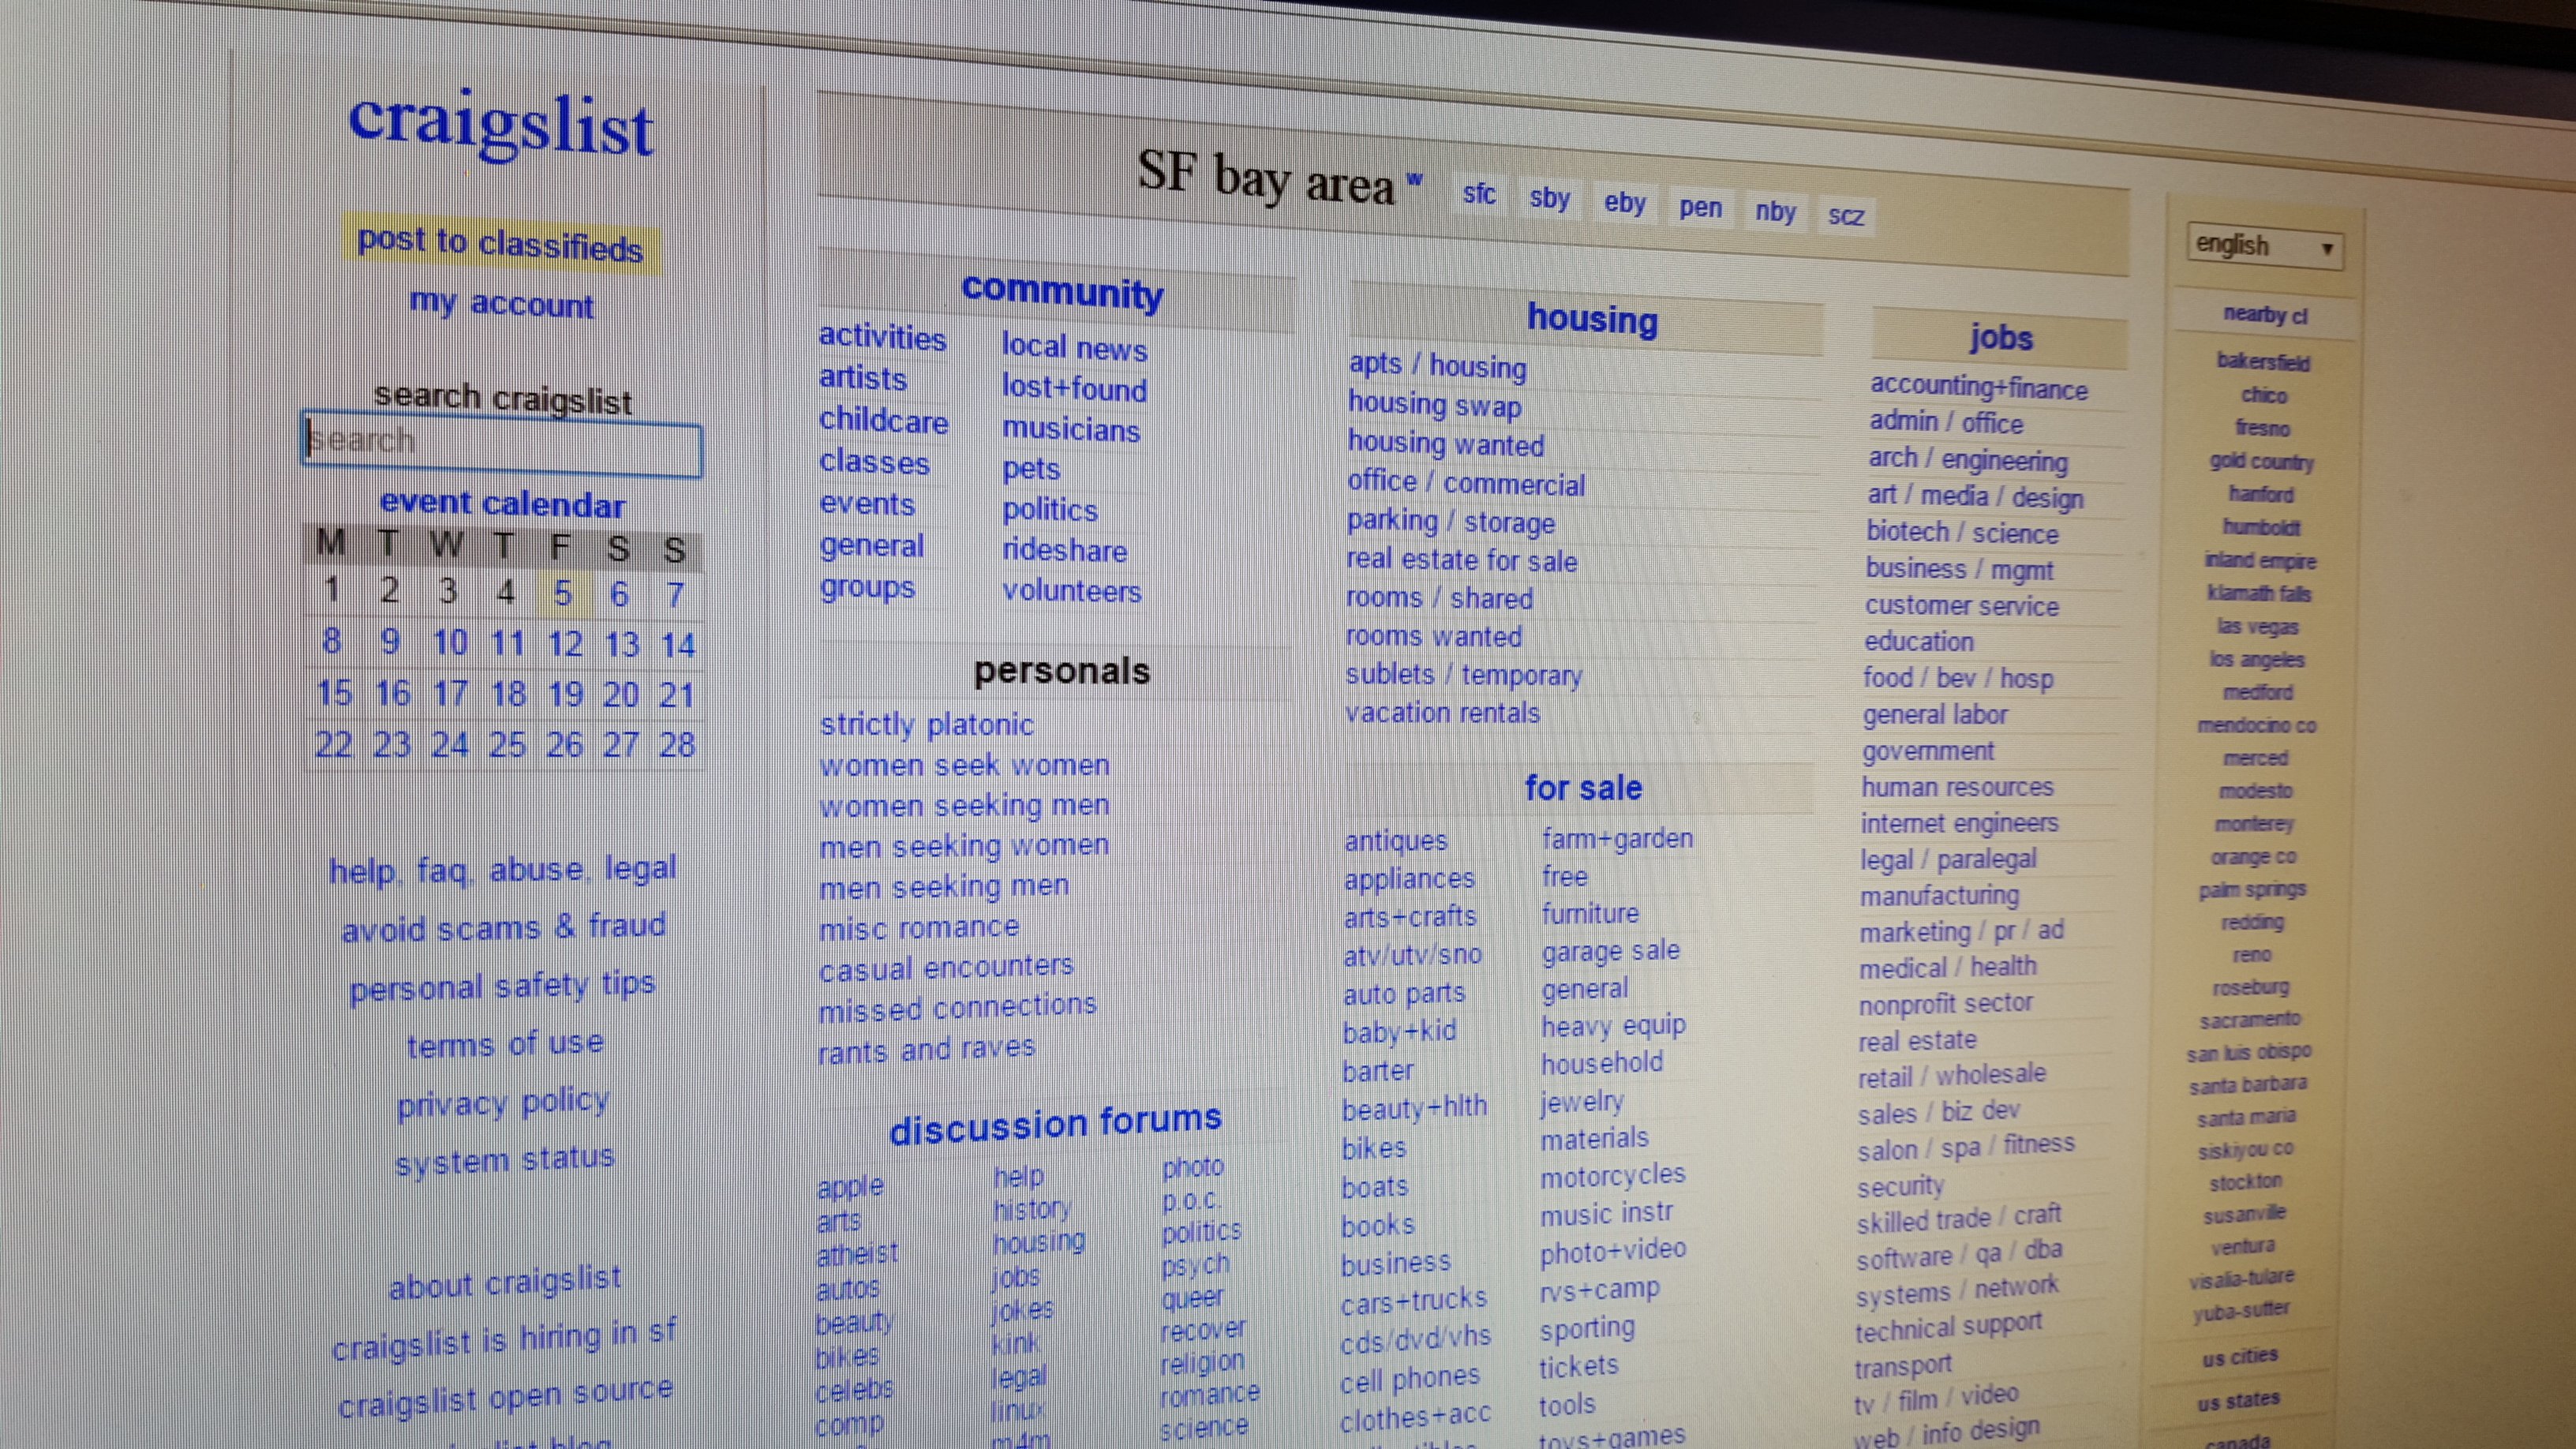 Craigslist Closes Personals Sections In US - CBS San Francisco